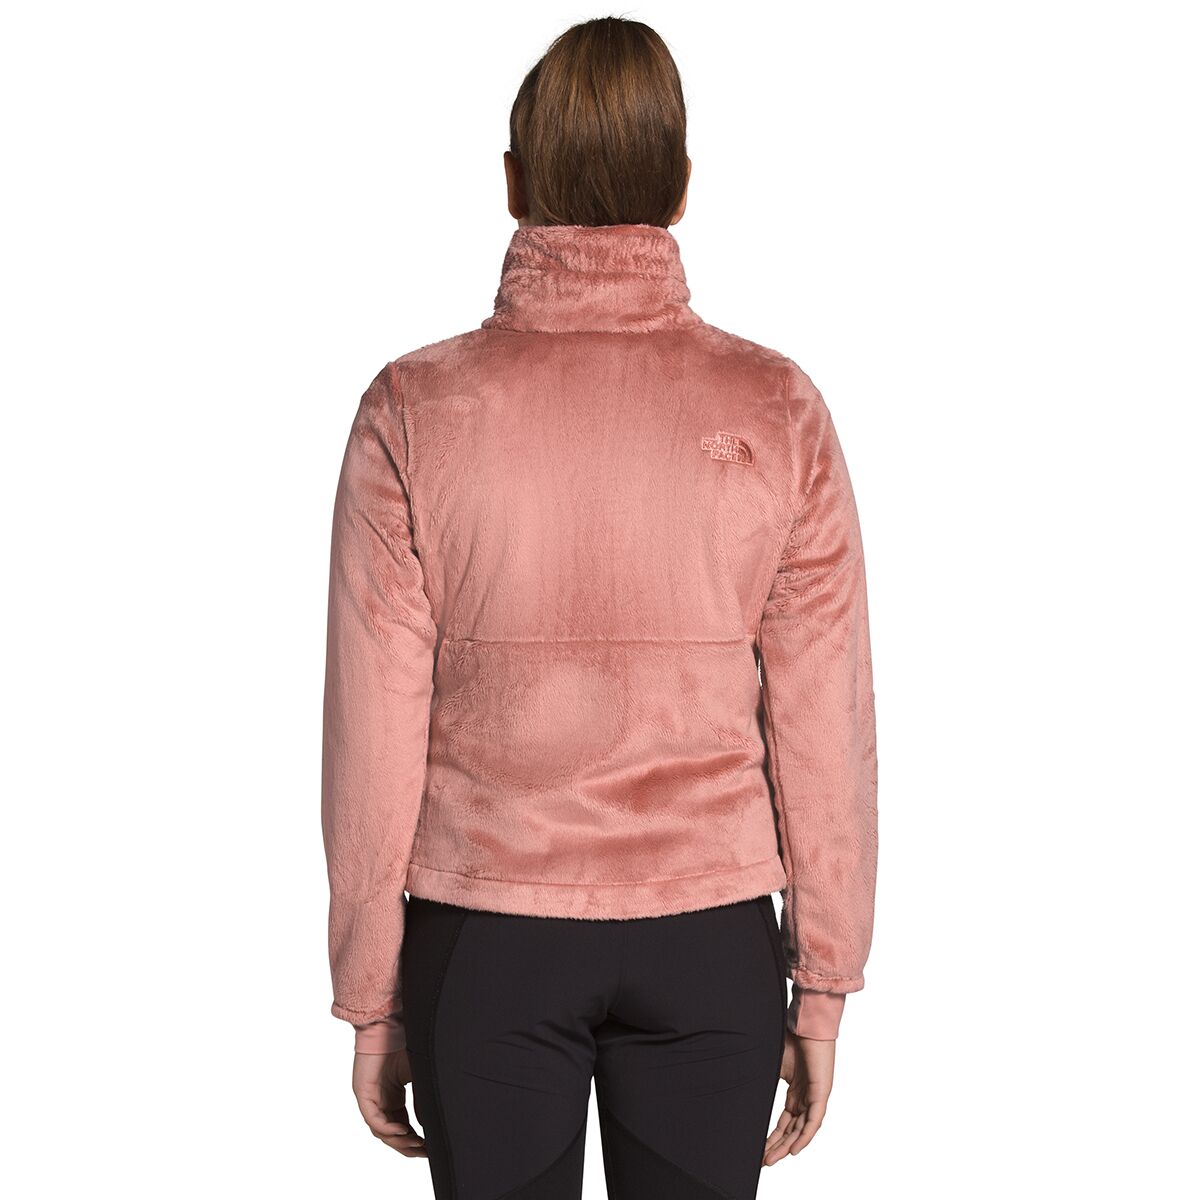 The North Face Osito Flow Jacket - Women's - Clothing